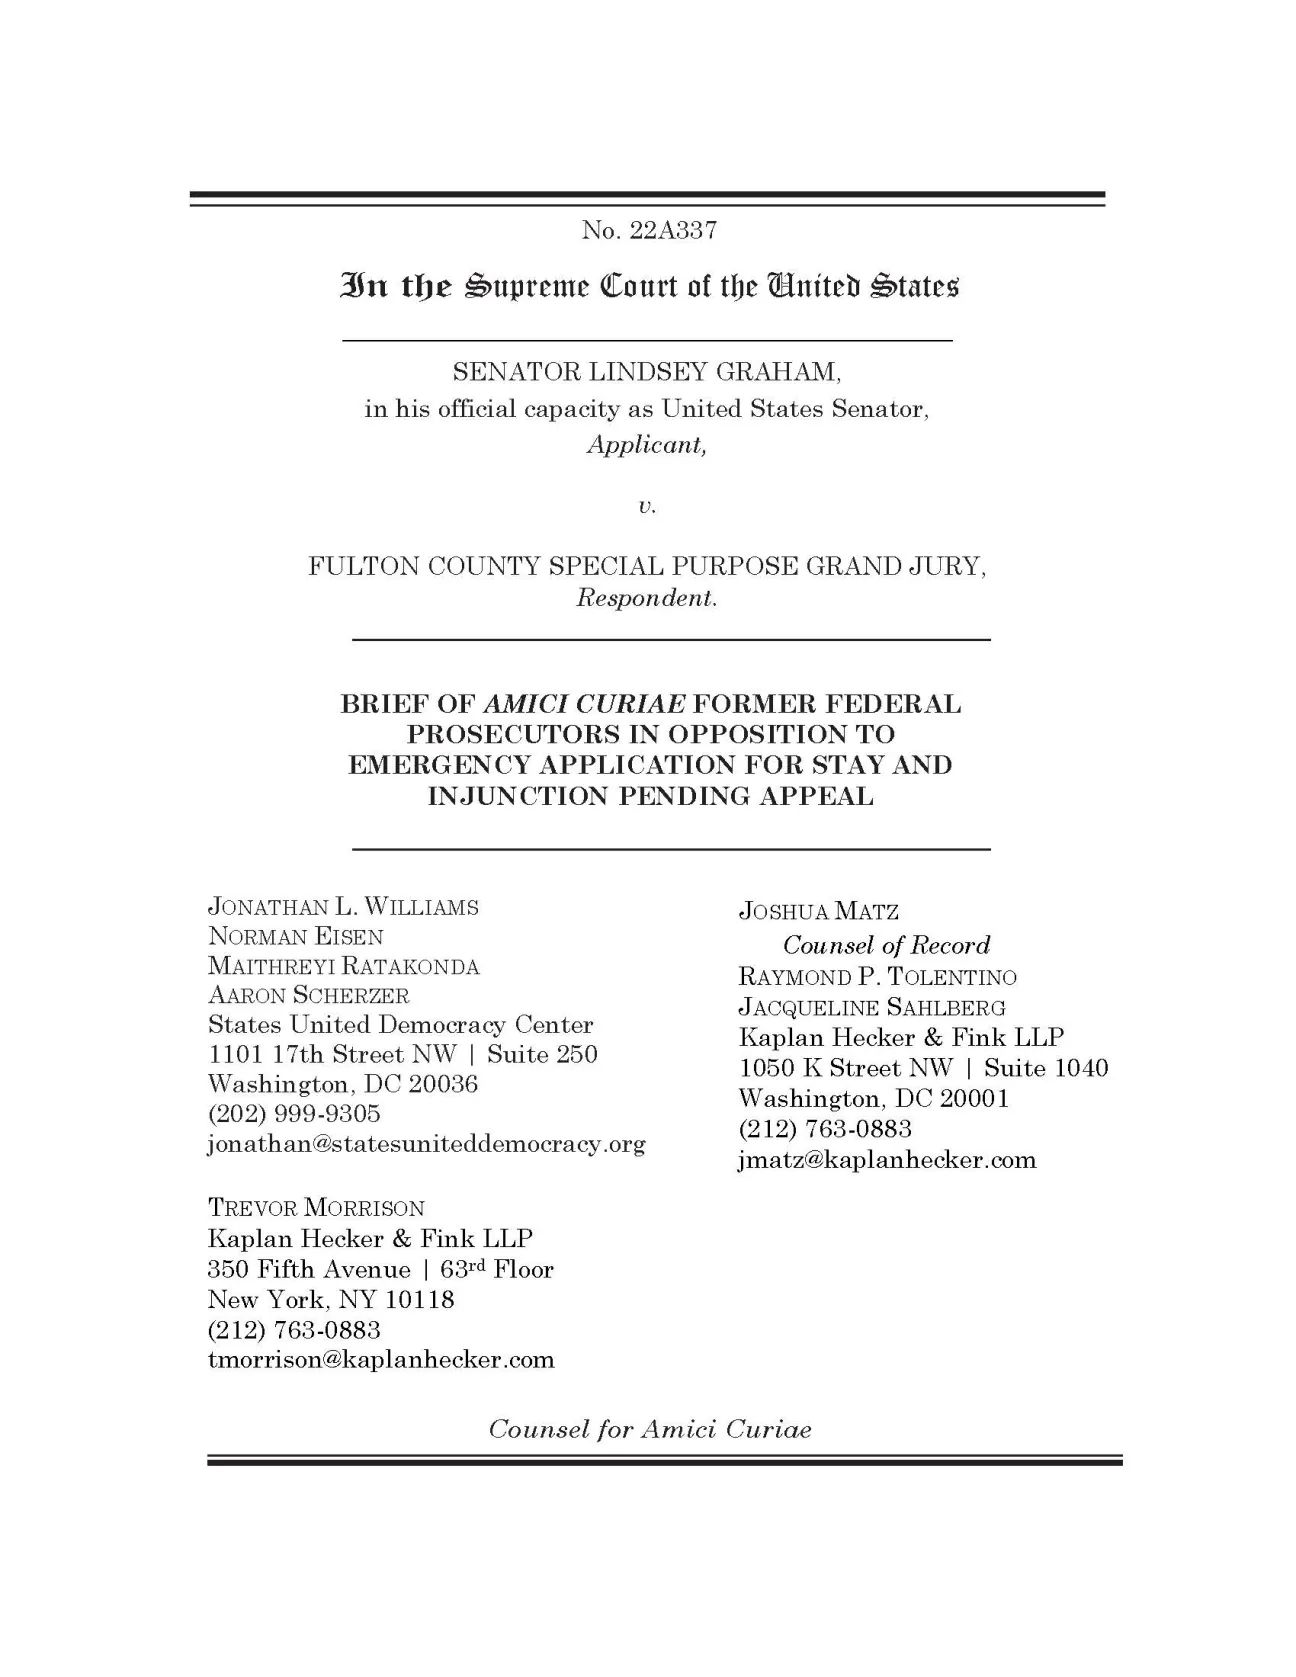 Kaplan Hecker & Fink LLP Files U.S. Supreme Court Amicus Brief Regarding Investigation into Interference with the 2020 Election 